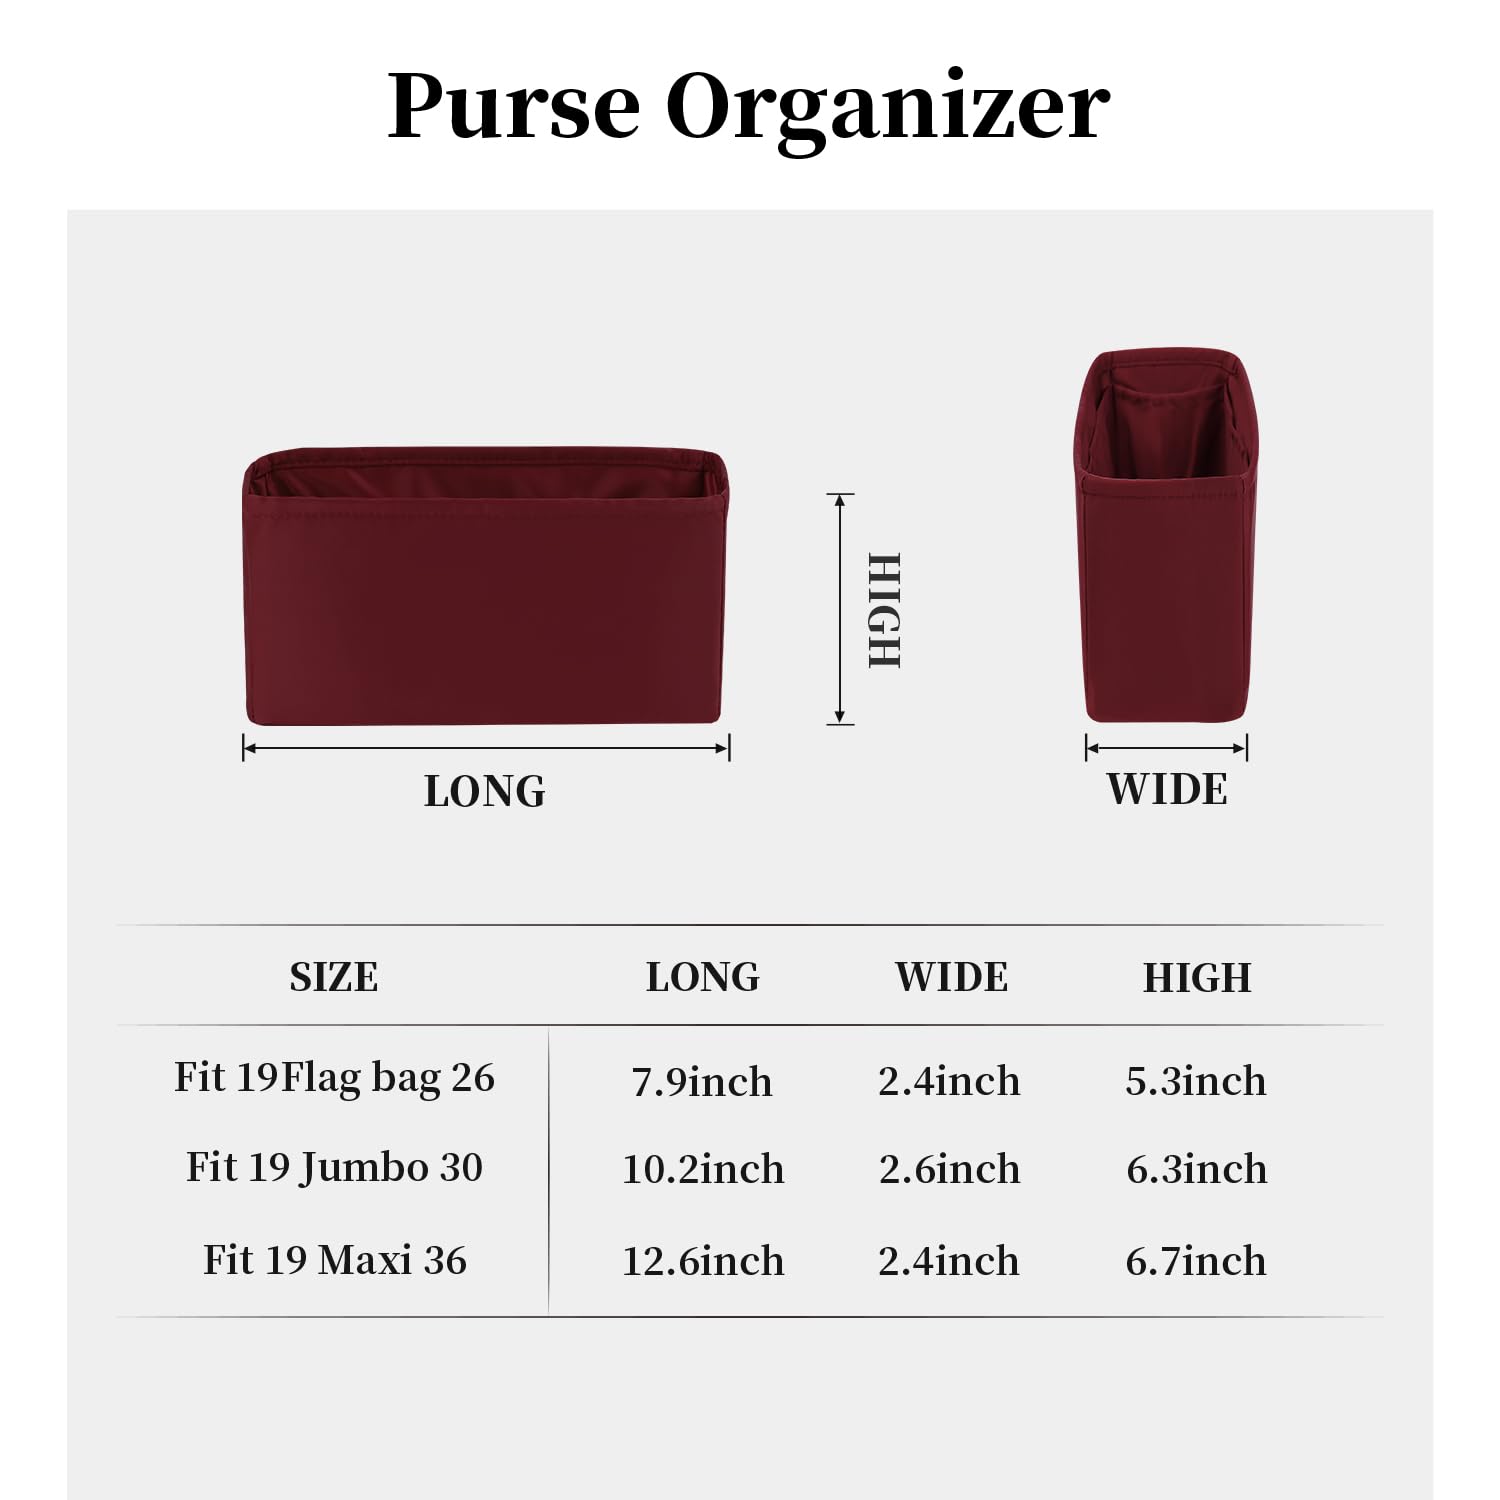 KINGS IN BAG Organizer for Purse Bags Tote HandBags Organizer with Silky Satin Fit for Chanel 19 Flap/Jumbo/Maxi Lightweight Shaper for Daily Use, 8 Pockets Capacity (Rouge Grenat, Chanel19 Flap26)